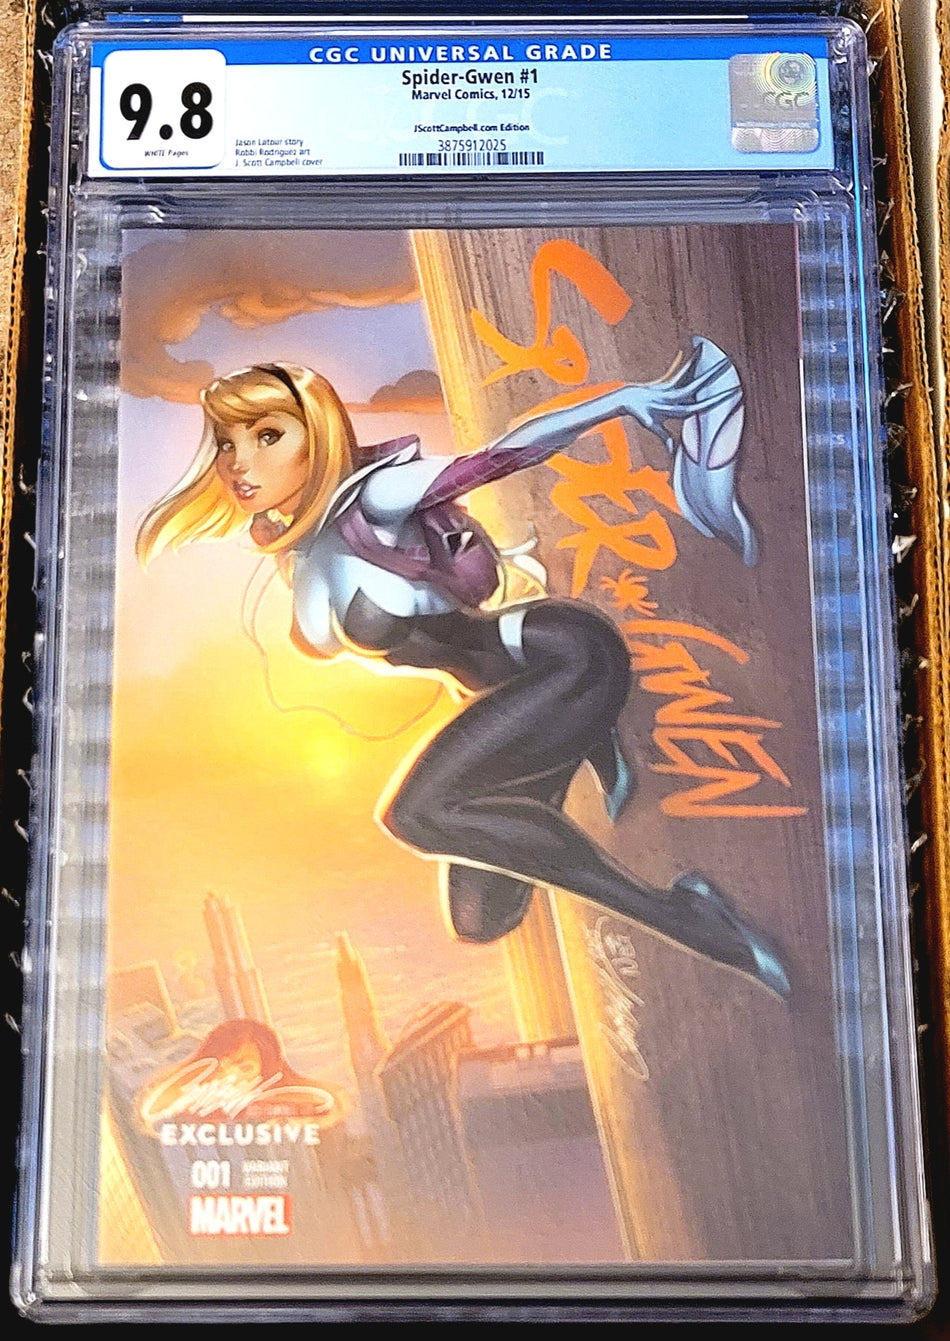 Spider-Gwen #1 (2015) JSC J Scott Campbell Exclusive CGC 9.8 (1st Appearance of Earth-65 Captain America in Cameo)